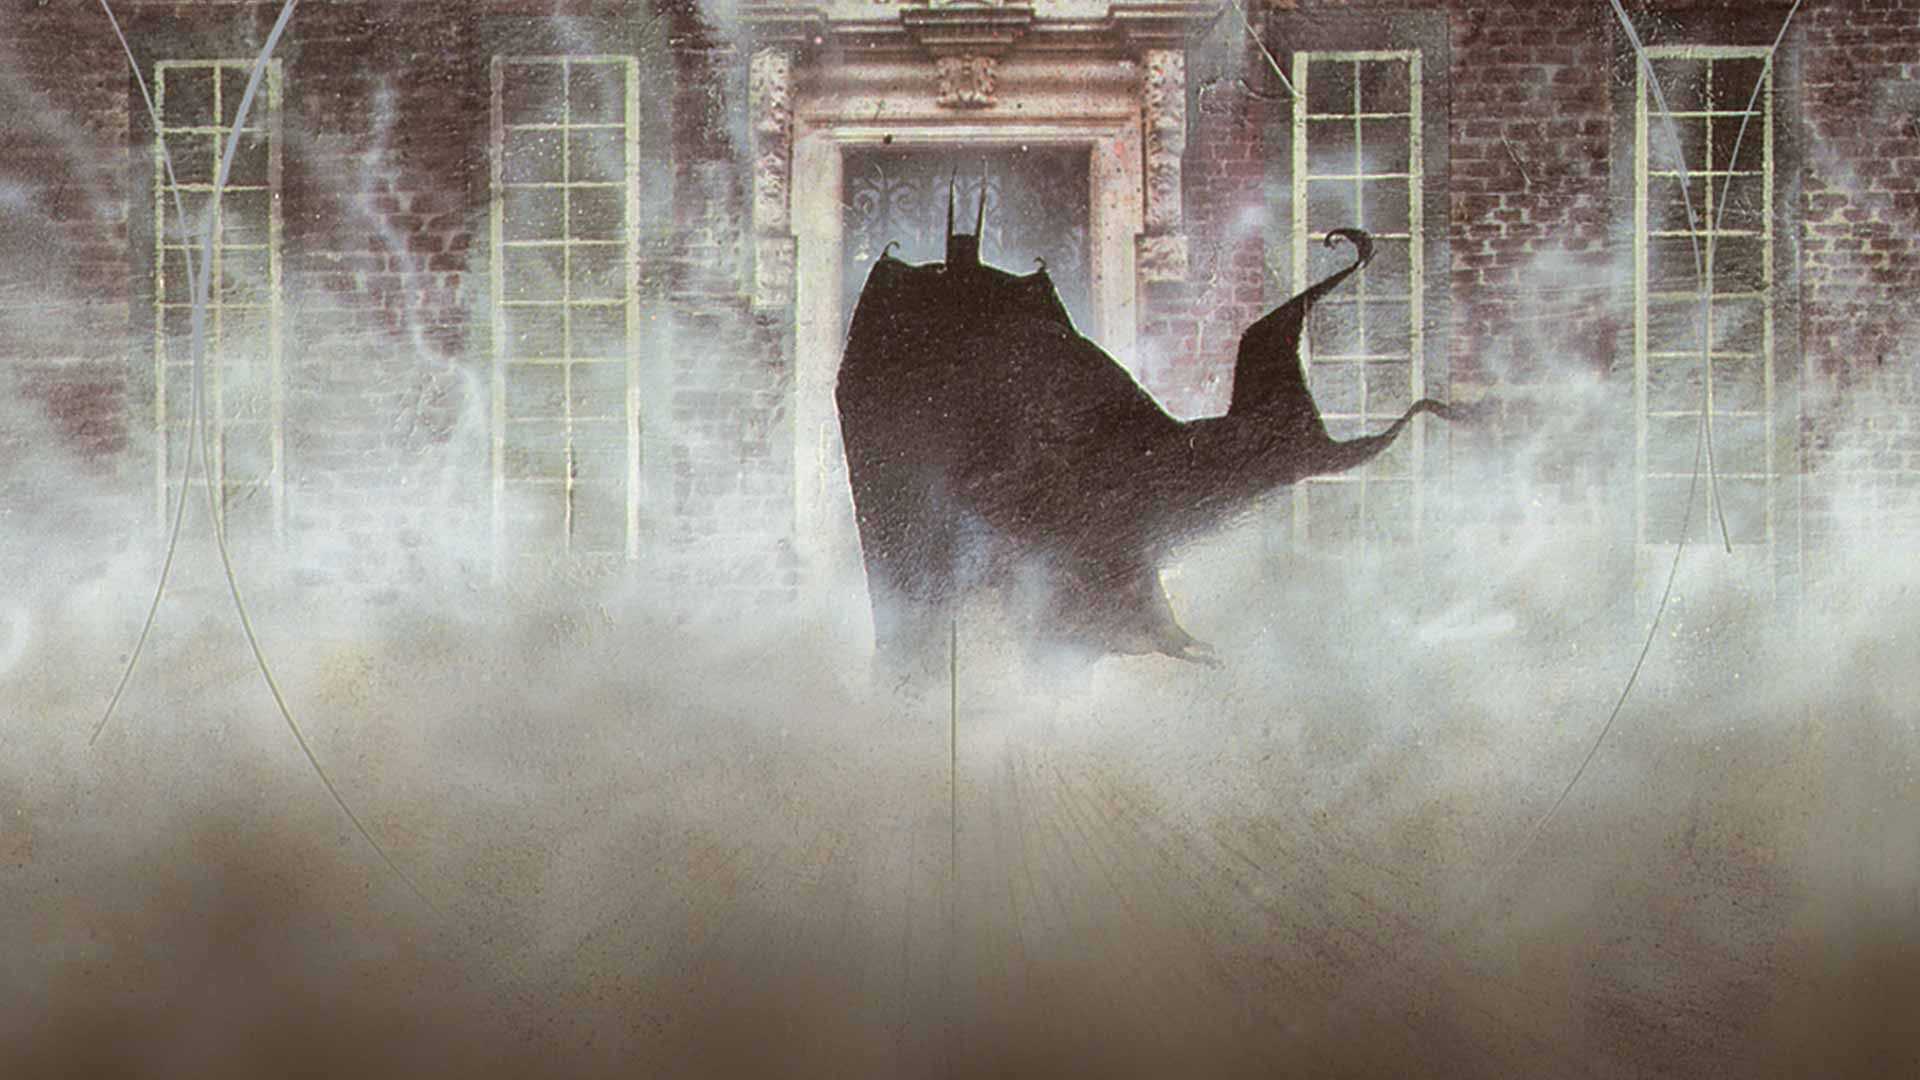 The HBO Max hires Antonio Campos as showrunner for The Batman spinoff series Arkham Asylum